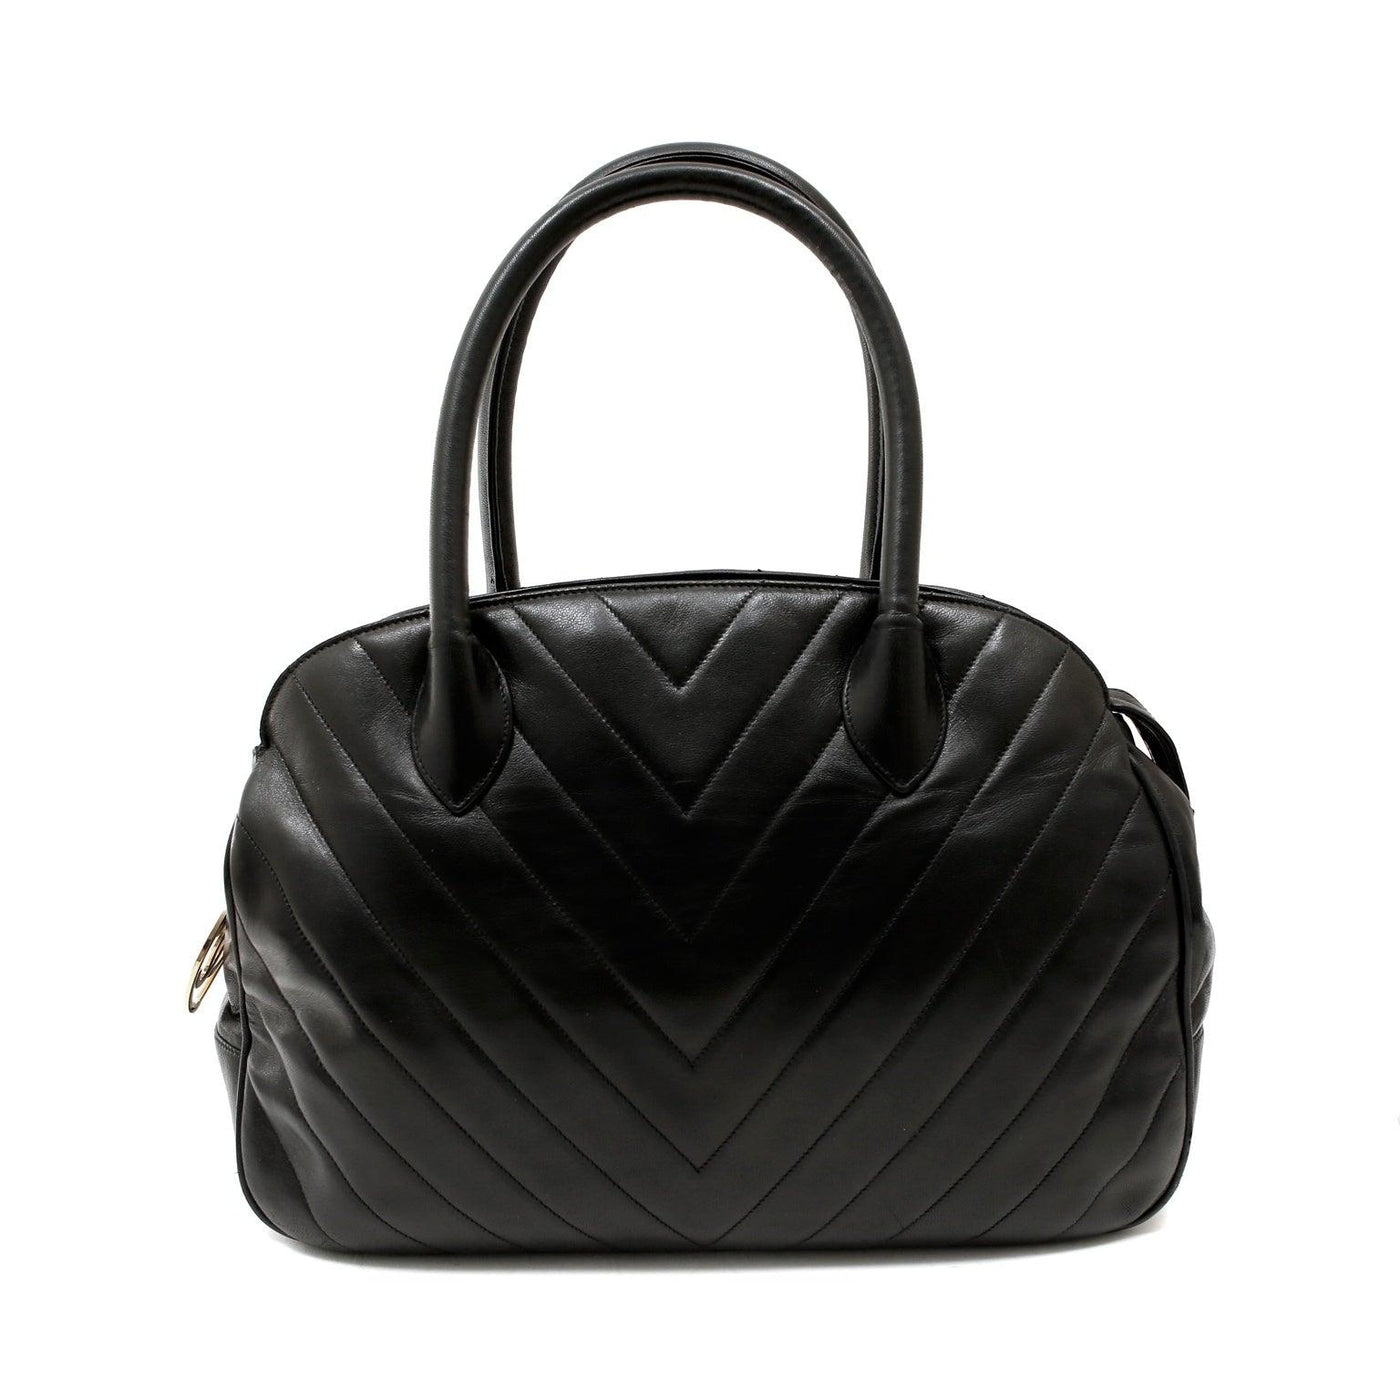 Chanel Black Chevron Leather Vintage Day Bag - Only Authentics